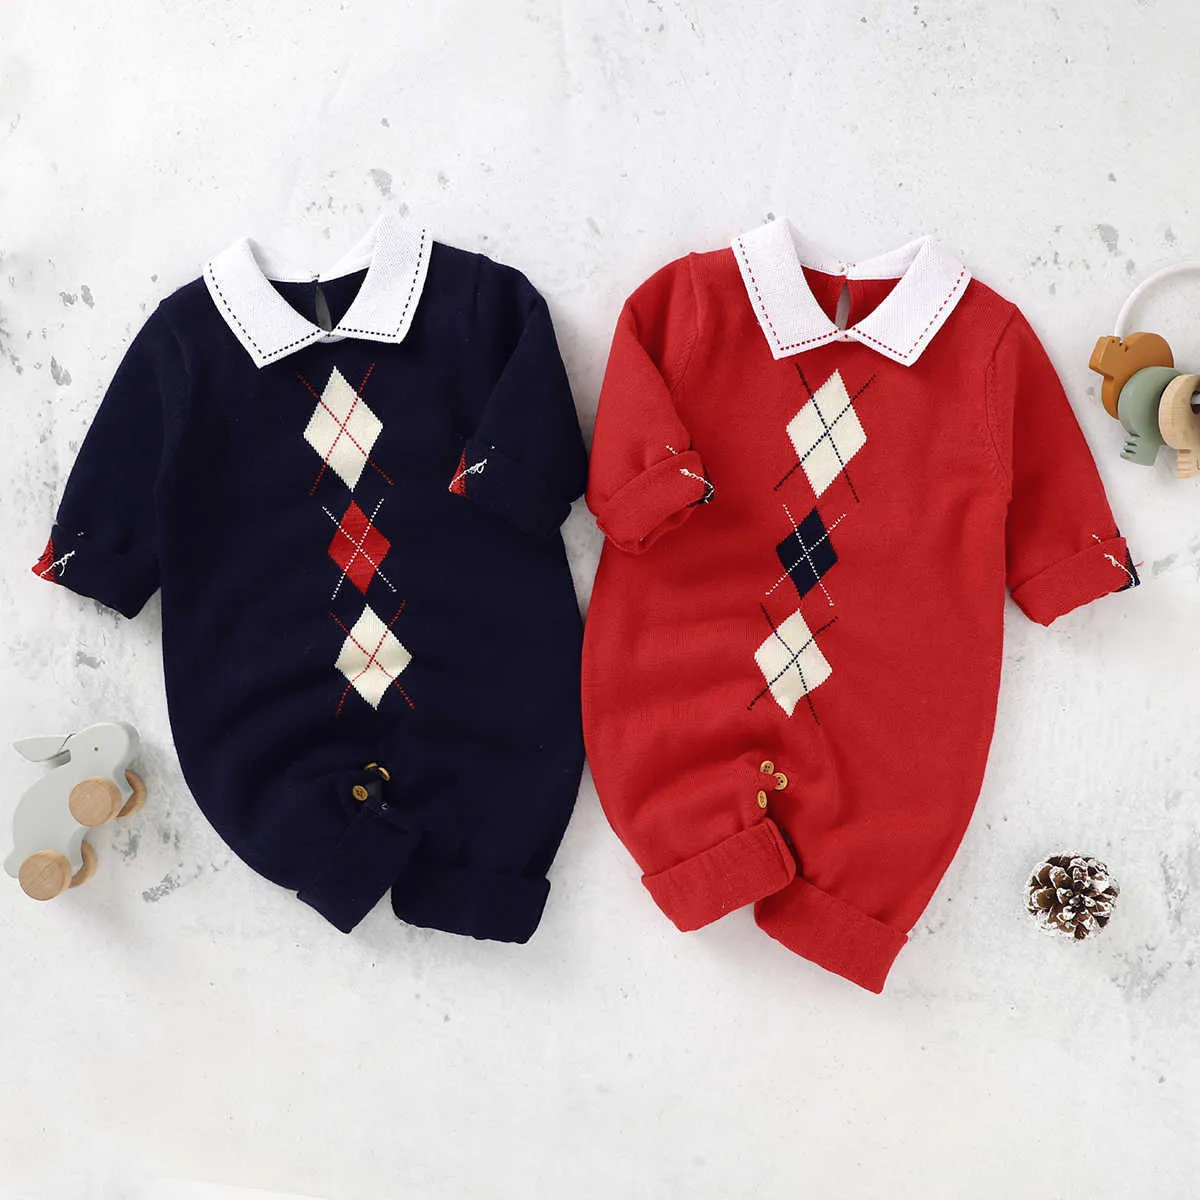 Rompers 018m Baby Autumn Winter Clothers Newbolbly Boys Boys Gentleman Romper Long Sleeve Cotton Beuttontits Outfit J220922